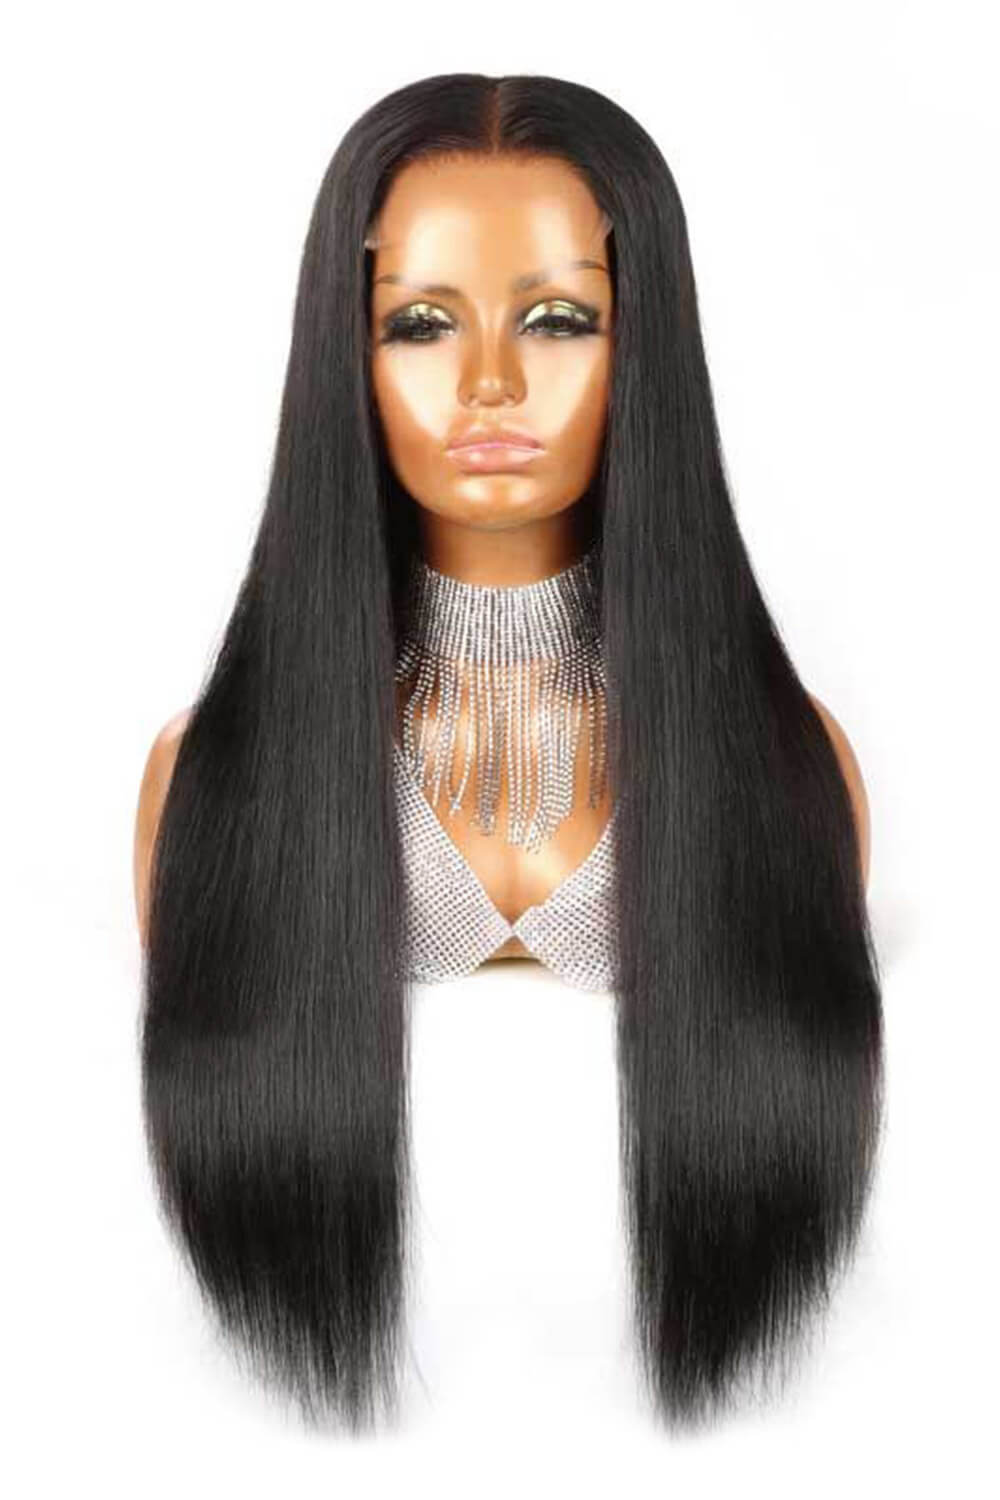 5x5-lace-closure-wig-straight-human-hair-black-middle-part-5